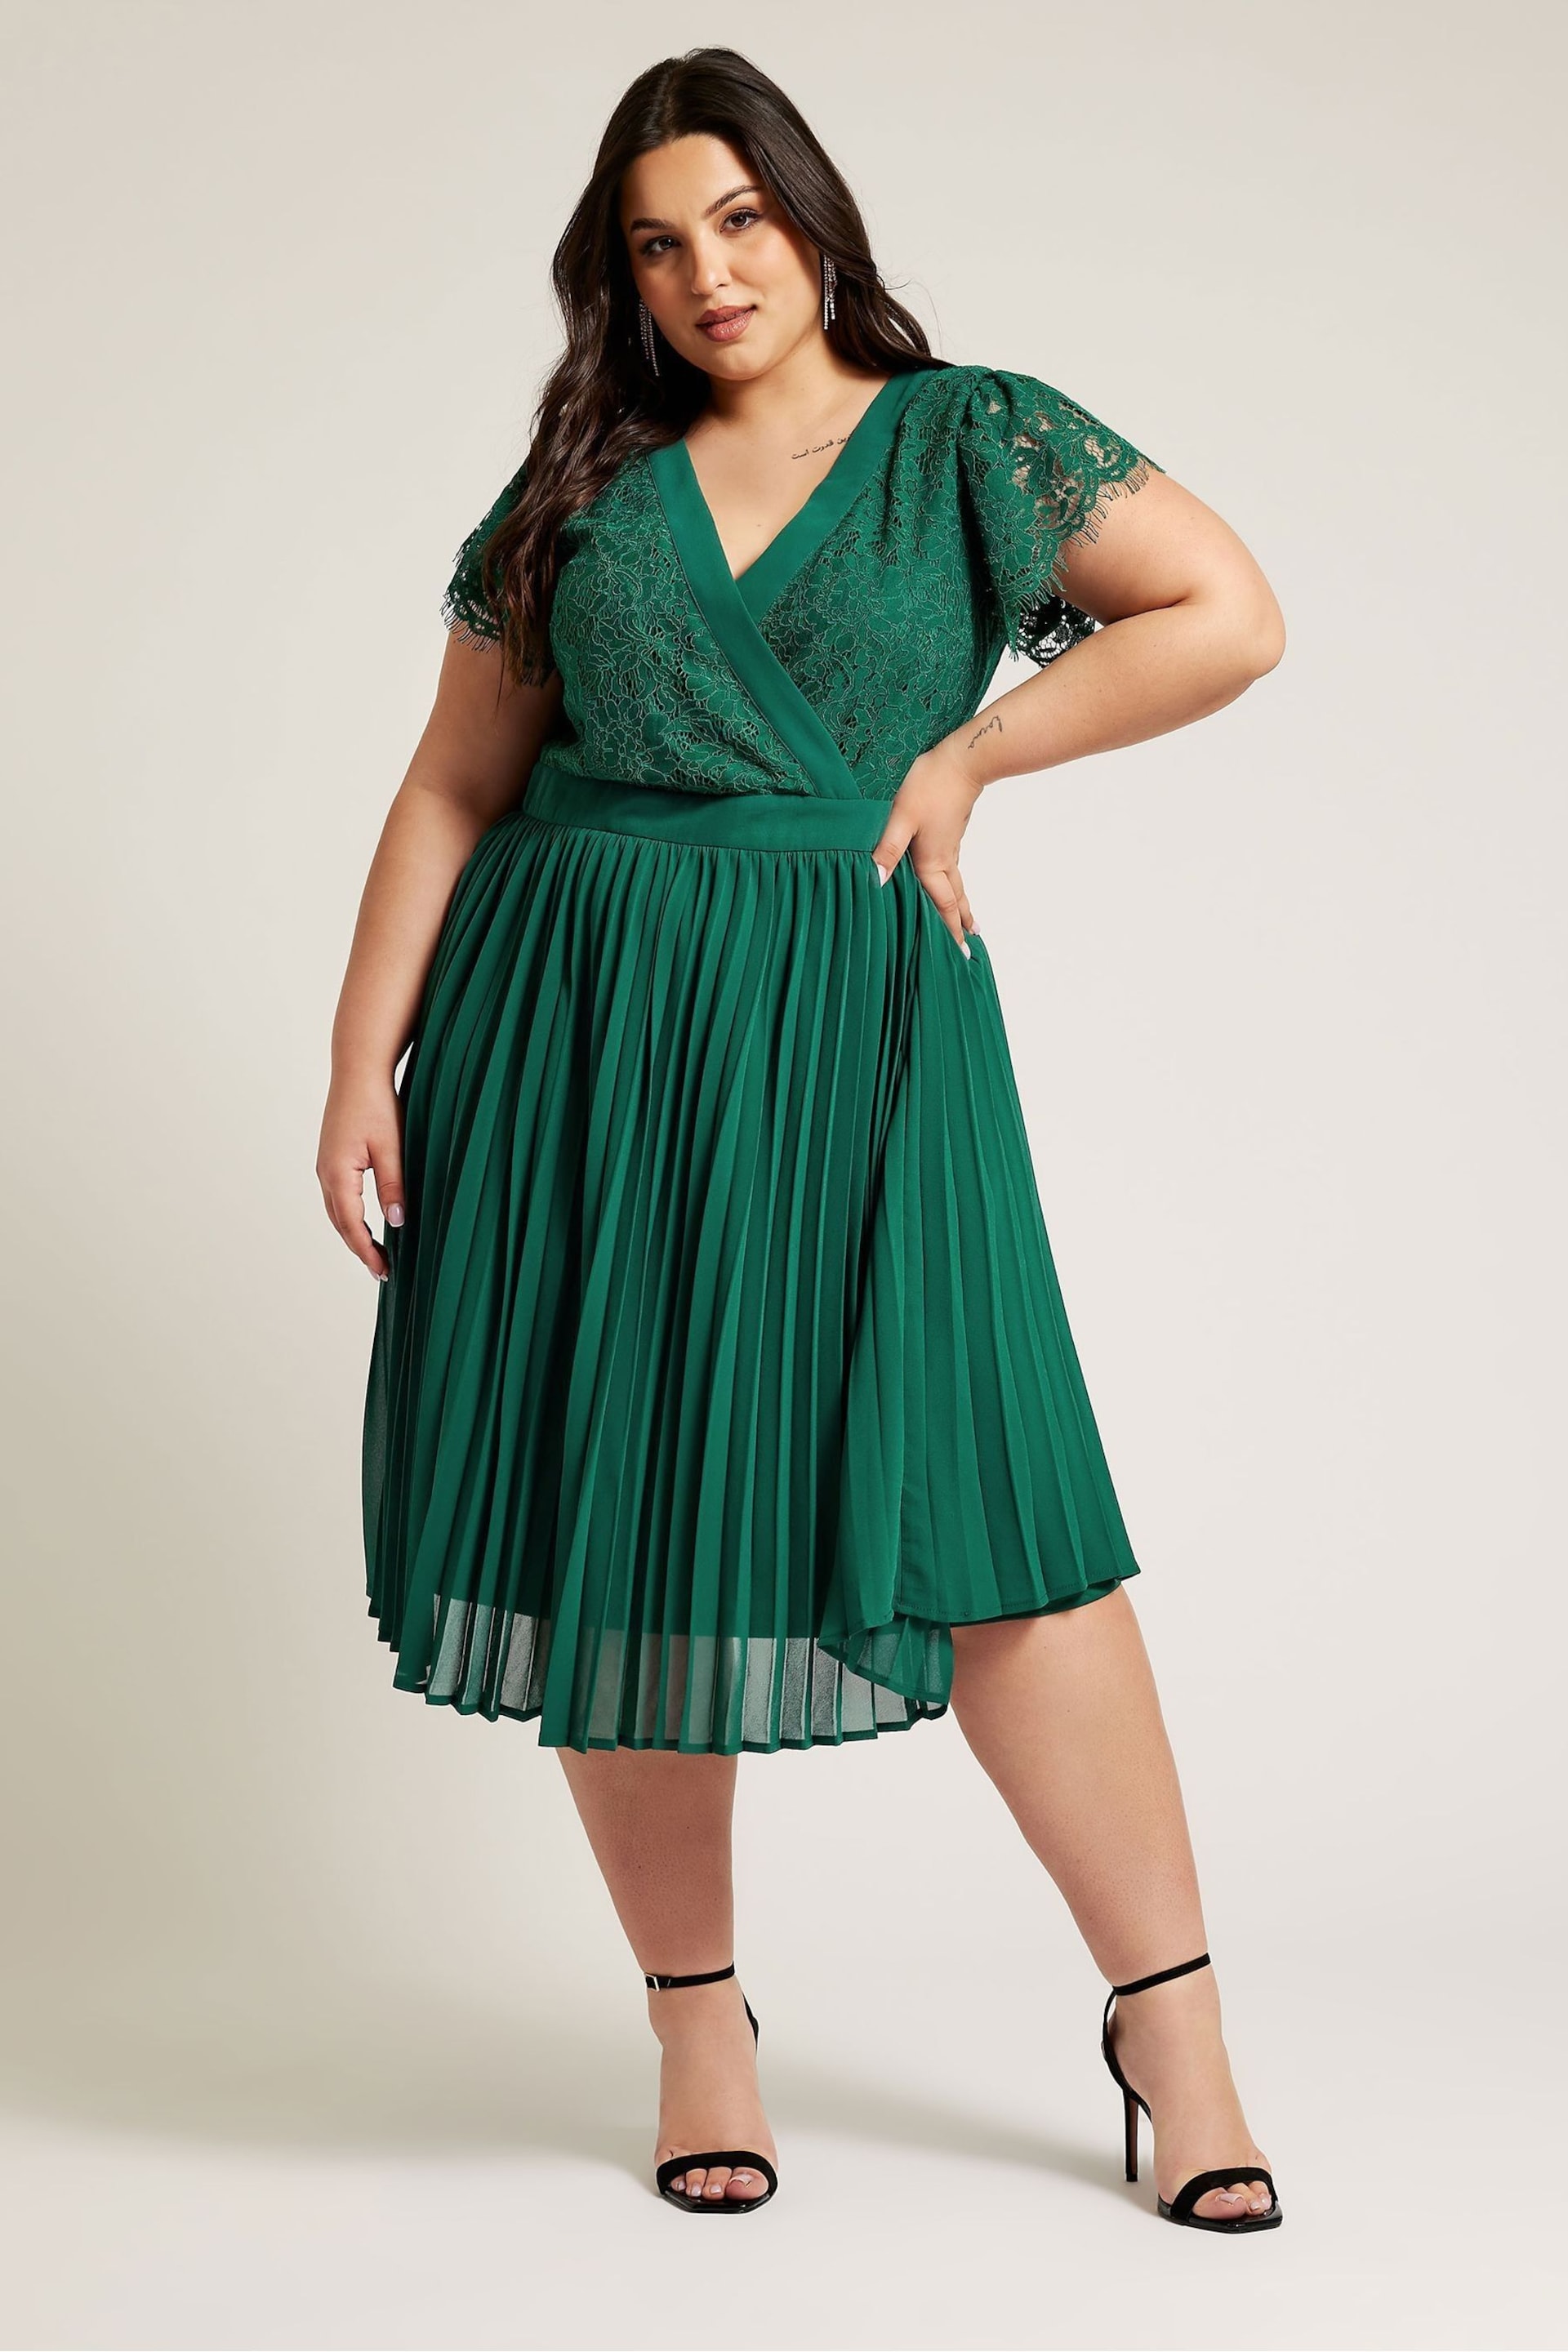 Yours London Curve Green Emerald Lace Wrap Midi Dress - Image 4 of 5